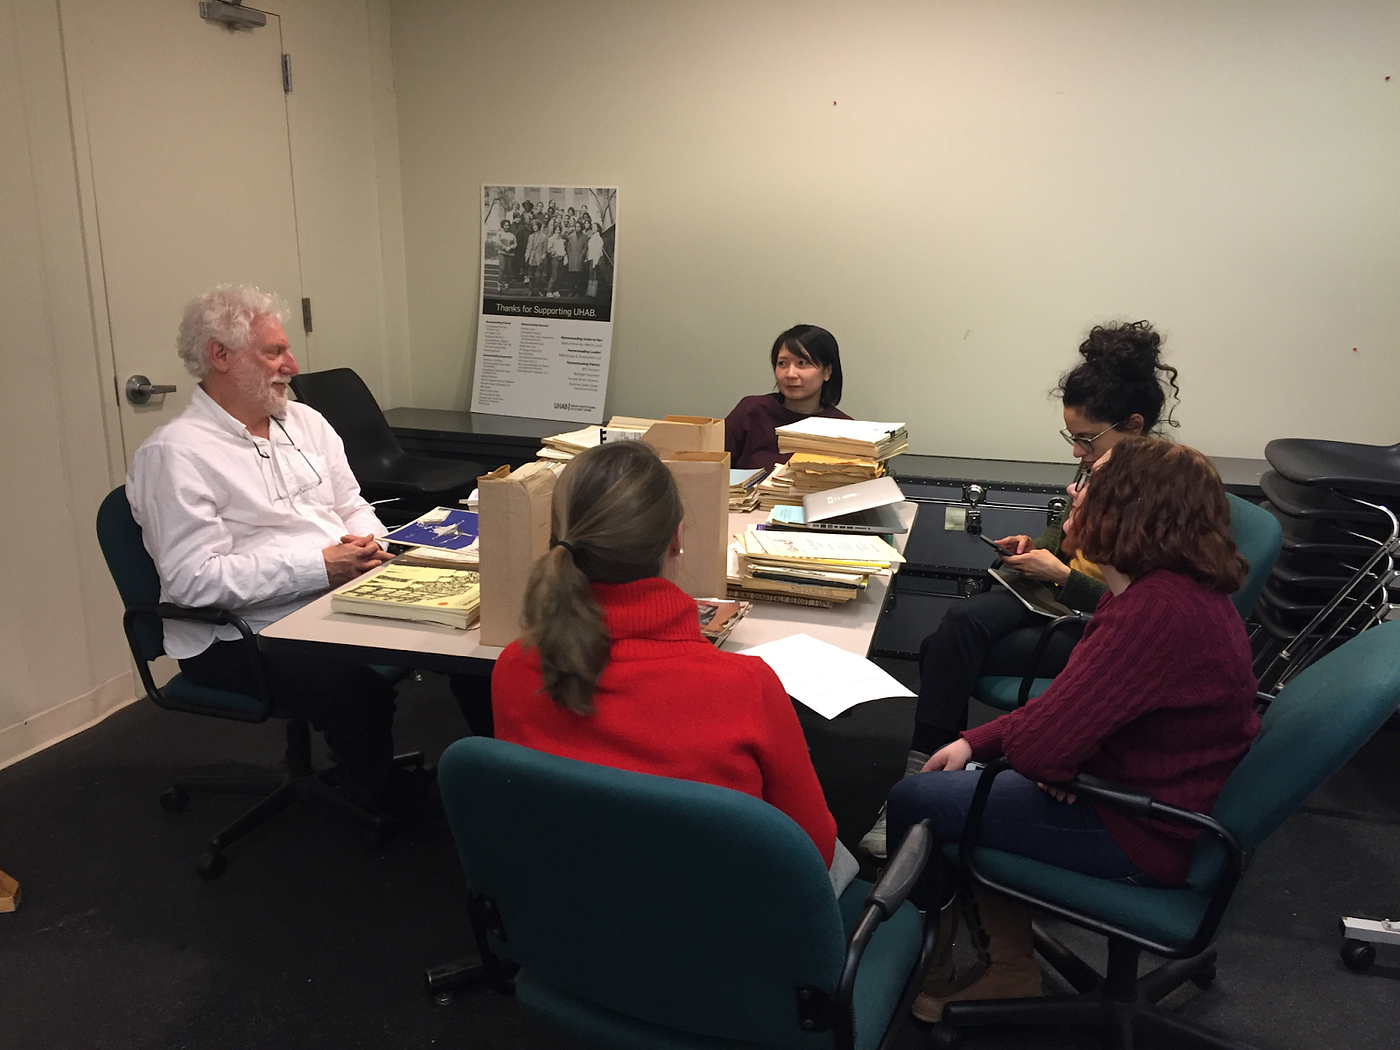 New York University Archives and Public History students meet with UHAB staff at the Wall Street Office in the spring of 2019. Source: Maggie Schreiner